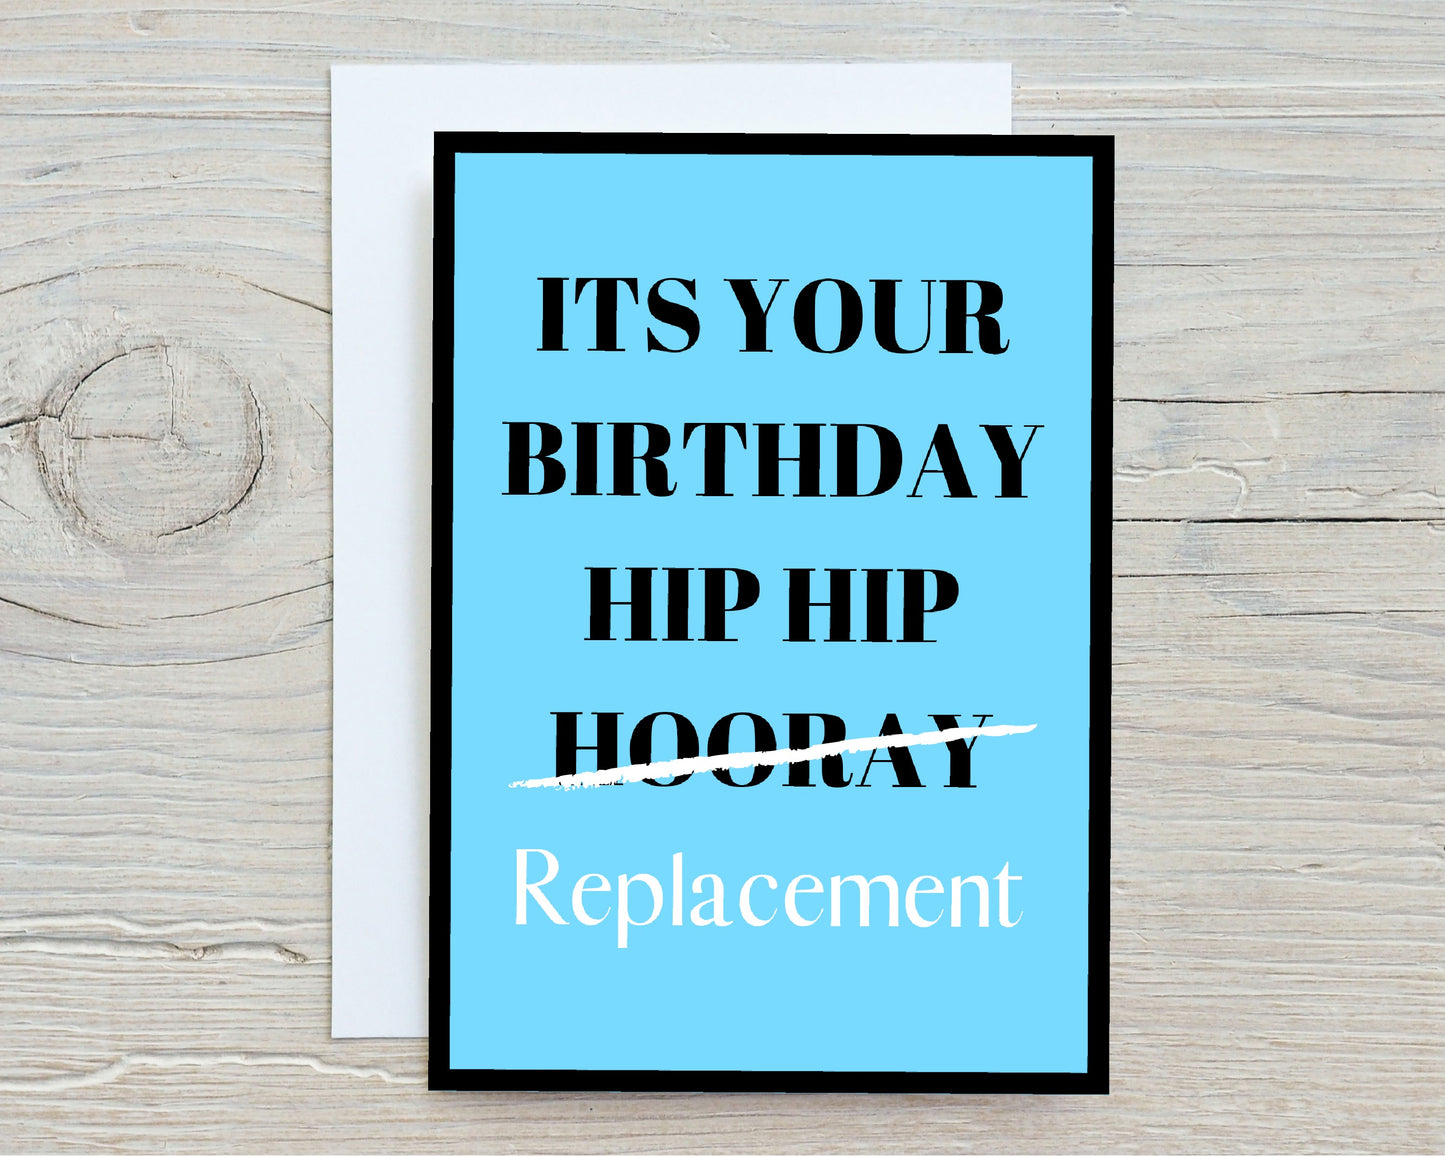 Birthday Card | It's Your Birthday | Hip Hip Replacement | Funny Card | Joke Card